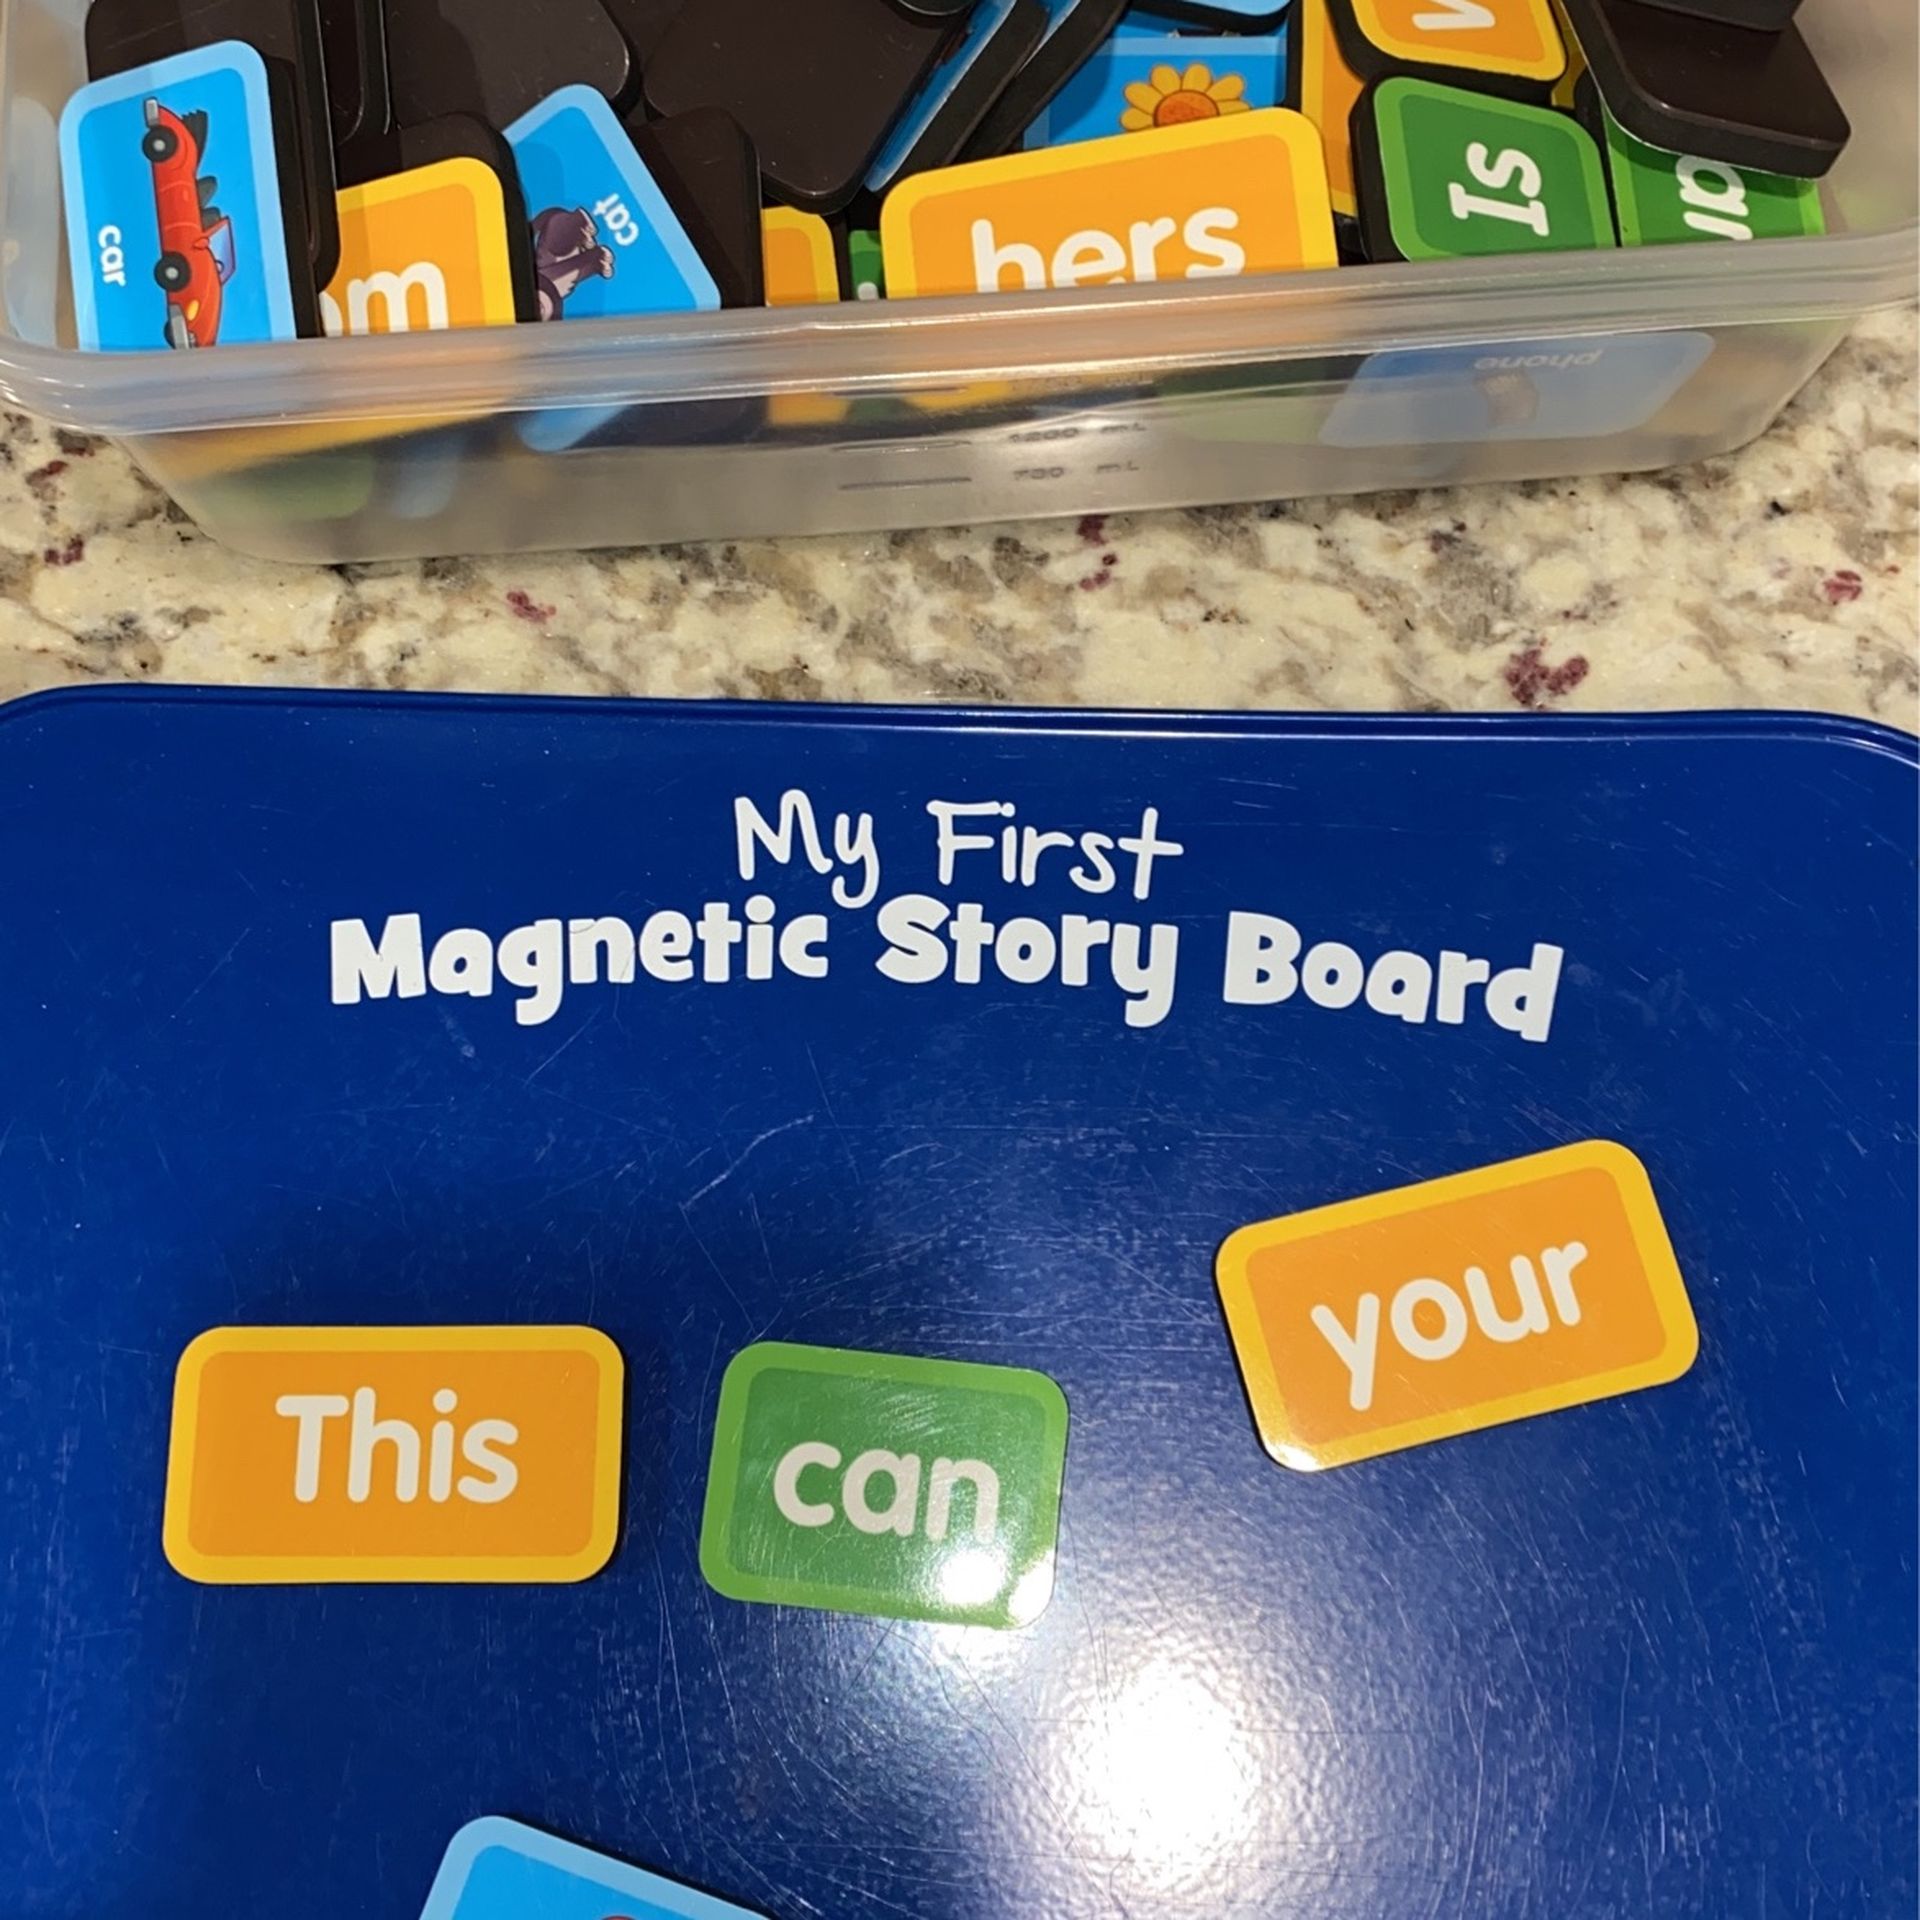 My First Magnetic Story Board